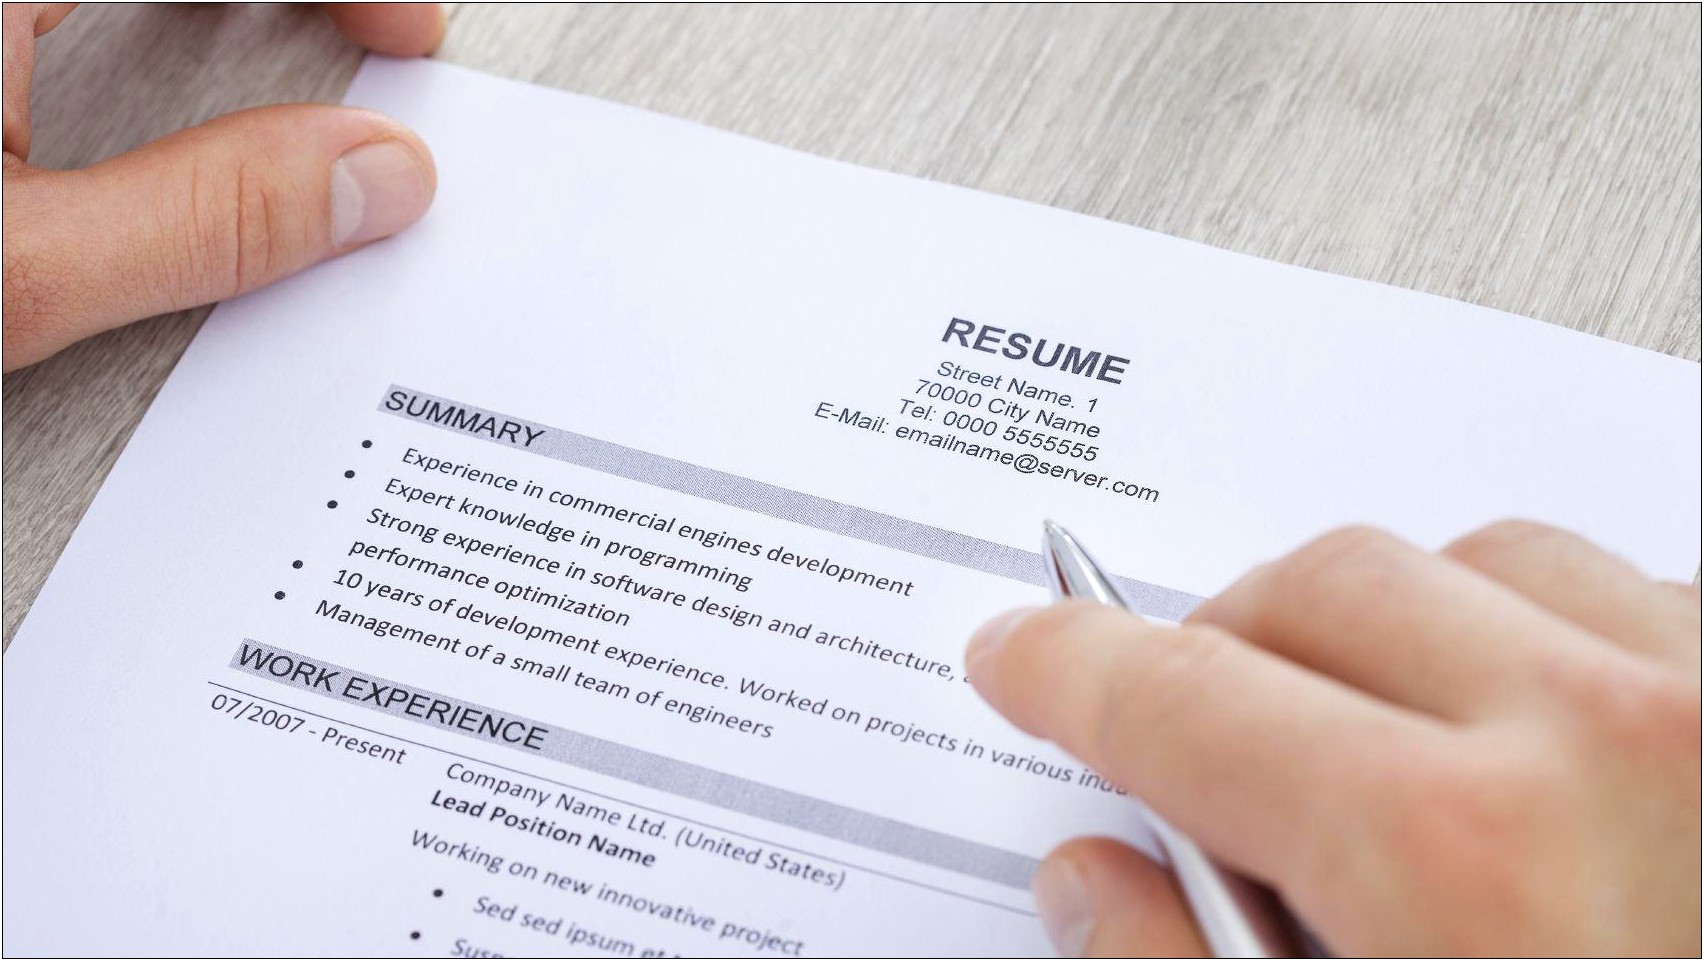 Good Interests To Have On Your Resume